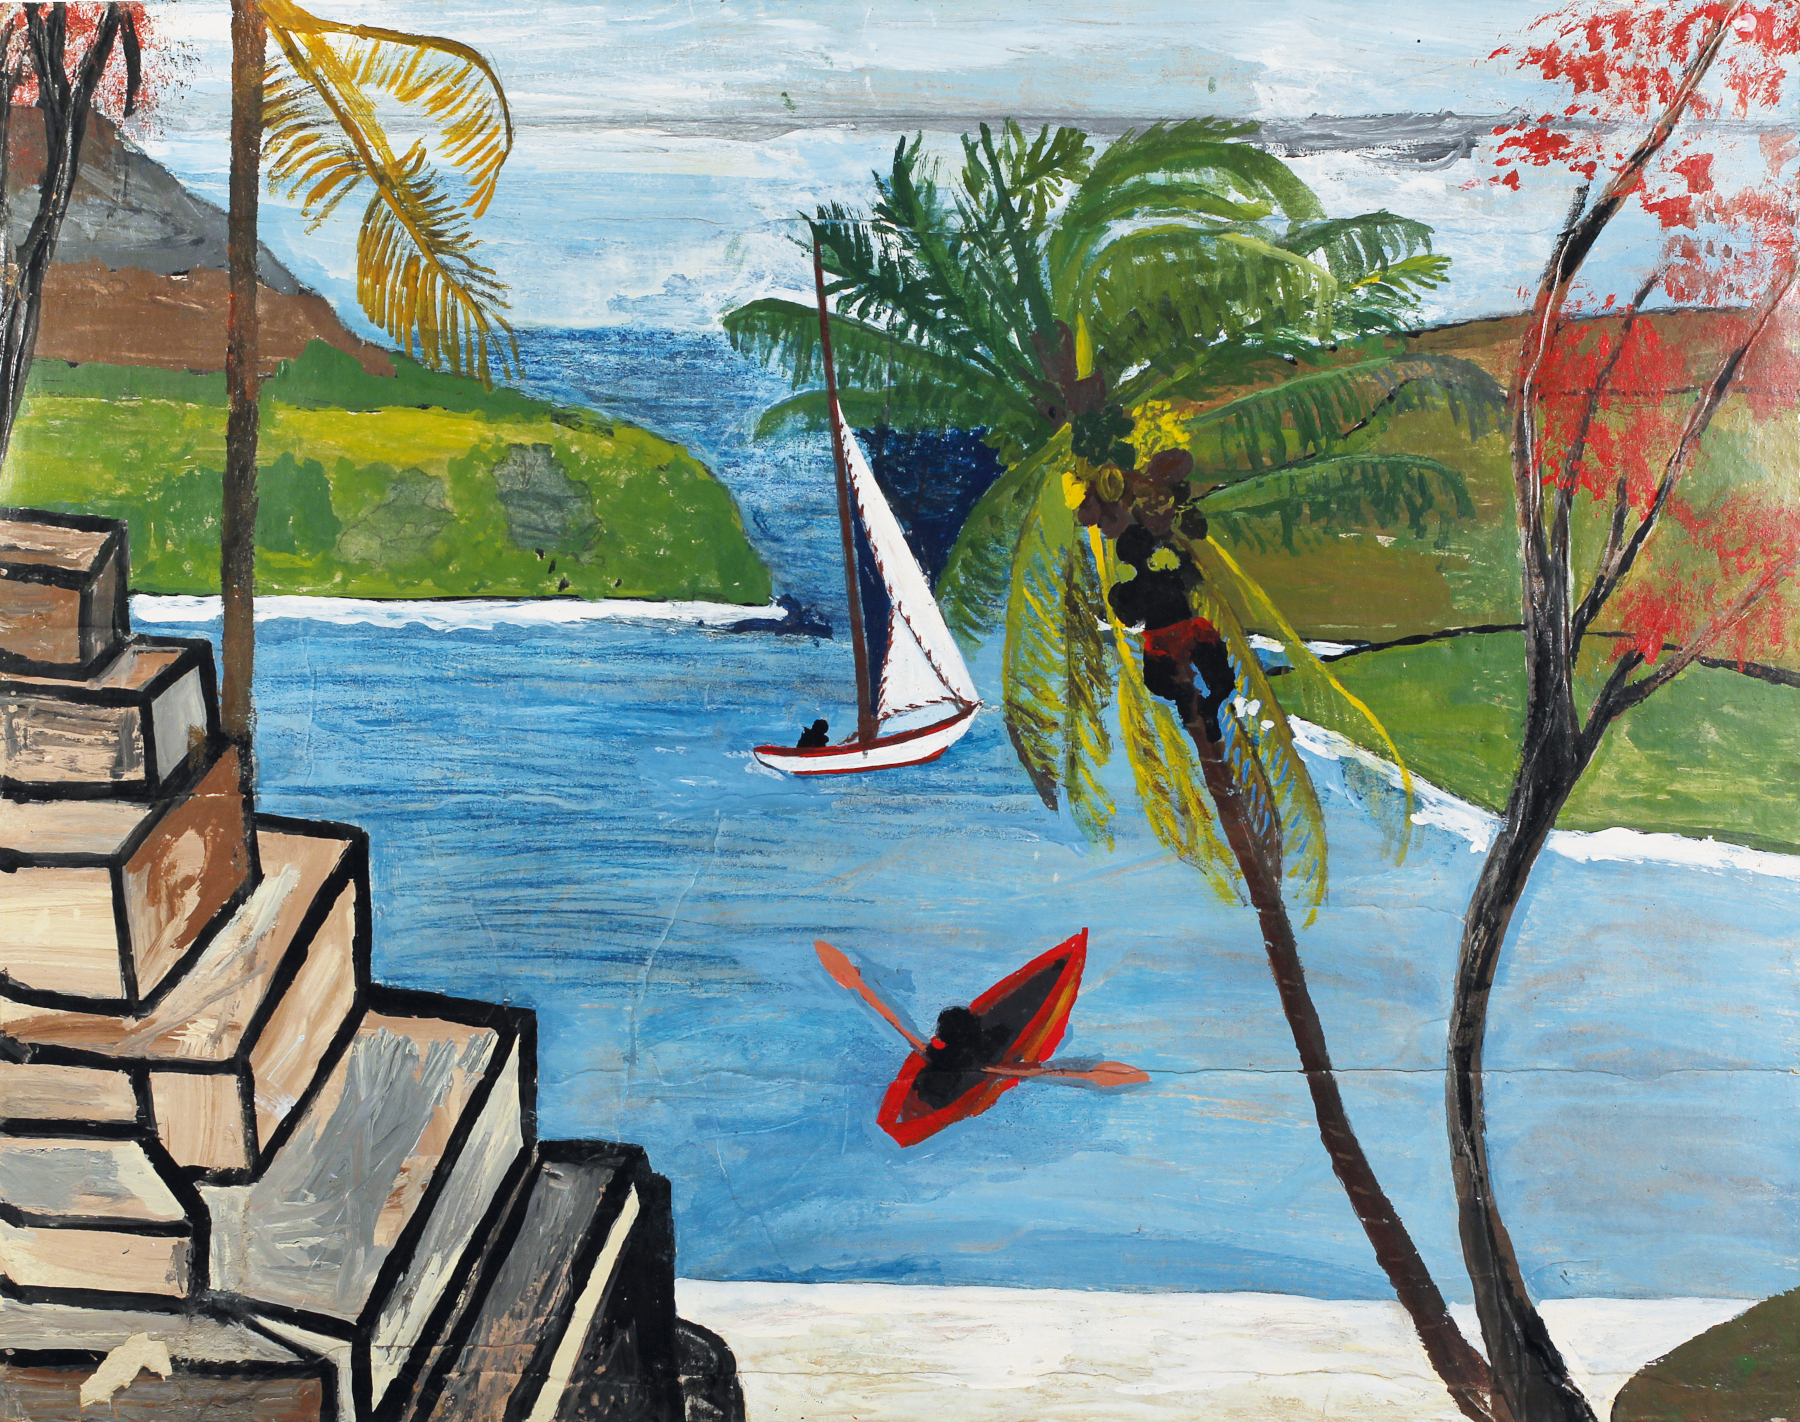 Frank Walter, Man Climbing a Coconut Palm and View of Red Canoe and Boat in Harbour (undated), Courtesy Frank Walter Family and Kenneth M. Milton Fine Arts